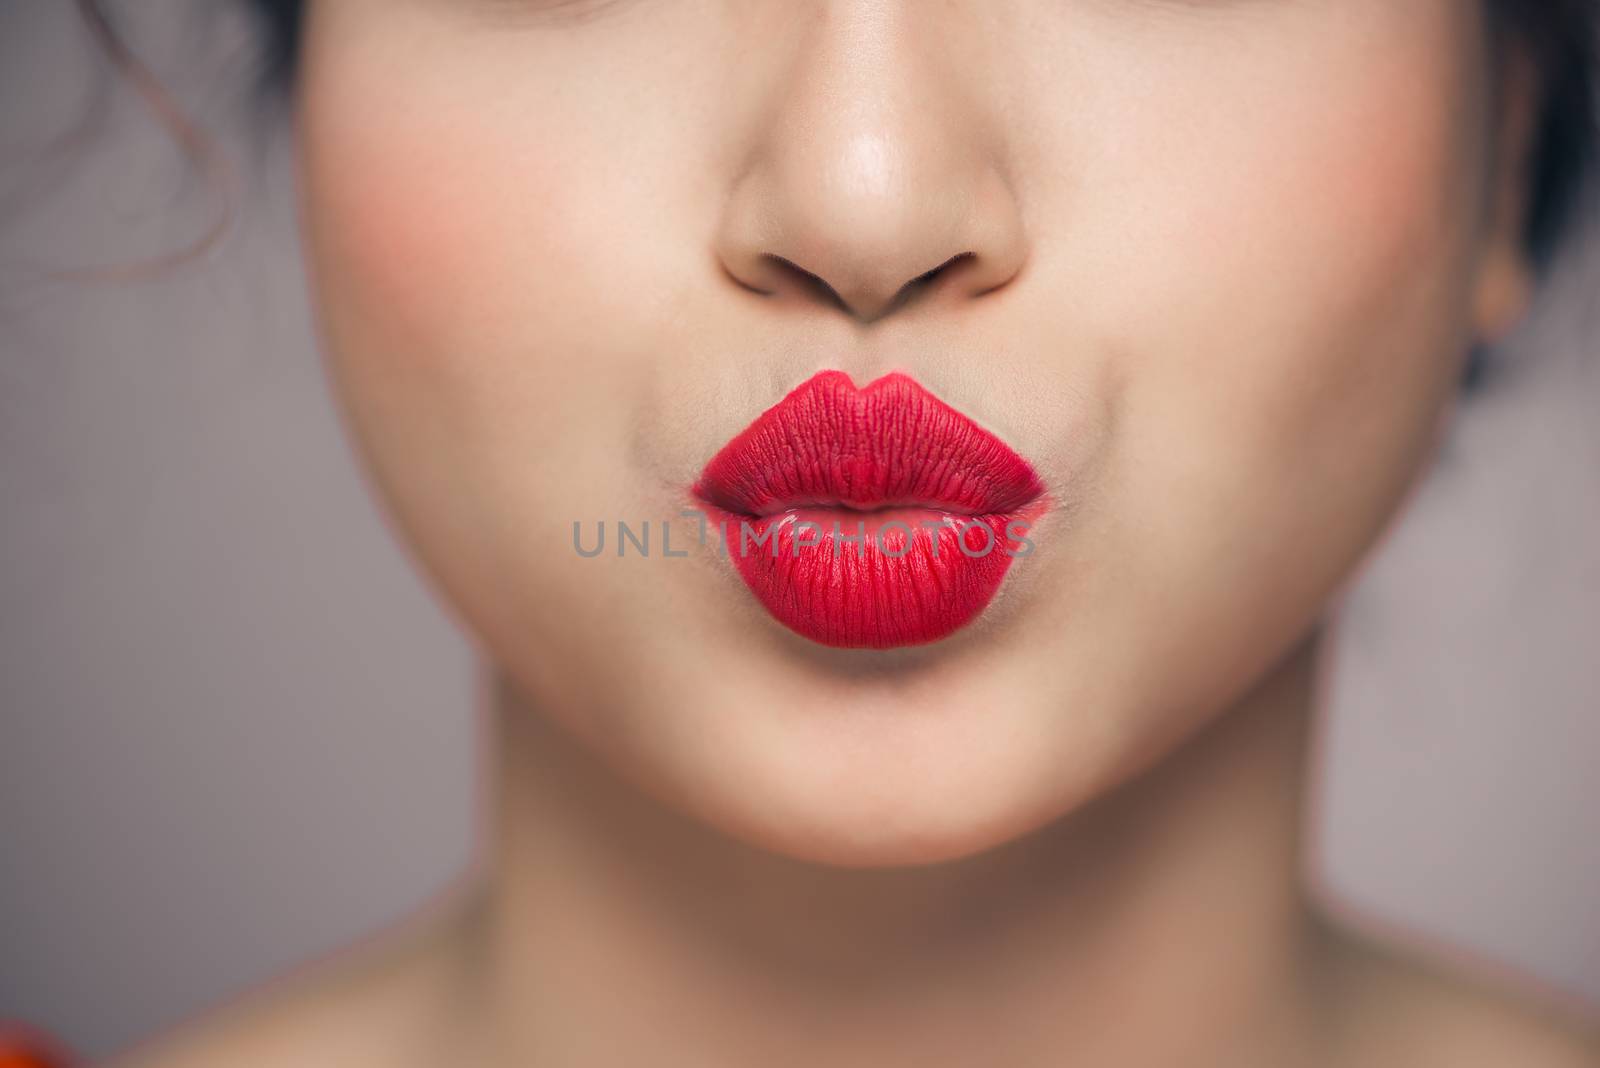 Woman's lips blowing a kiss with bright red lipstick by makidotvn